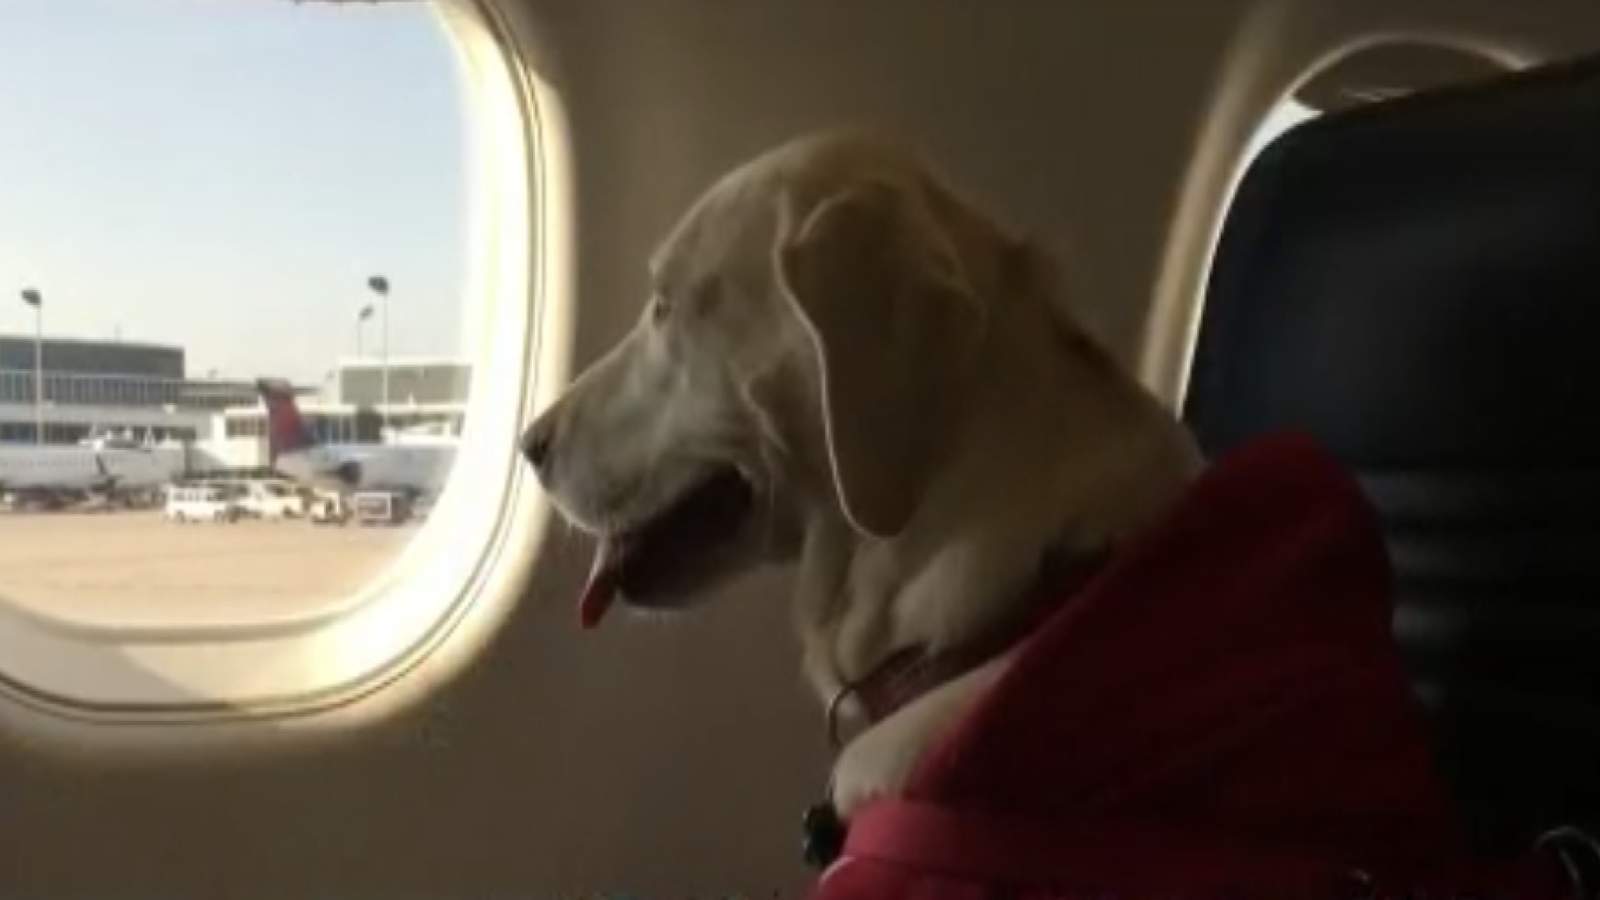 US tightens definition of service animals allowed on planes